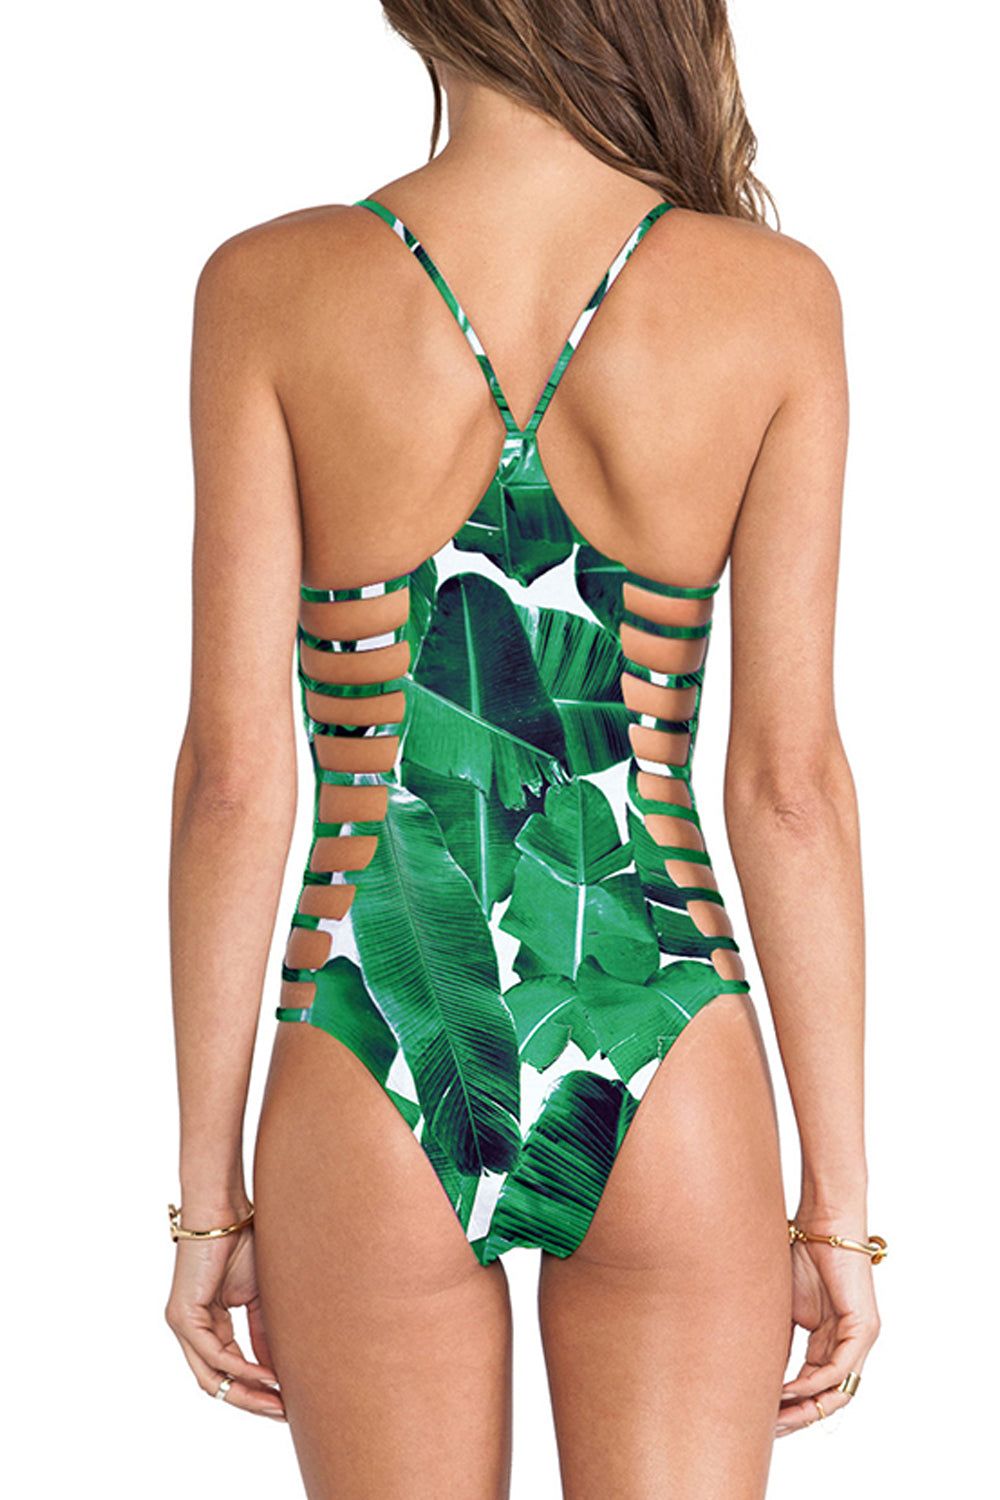 Iyasson Green Leaves Print With Strappy Detailing One-piece Swimsuit